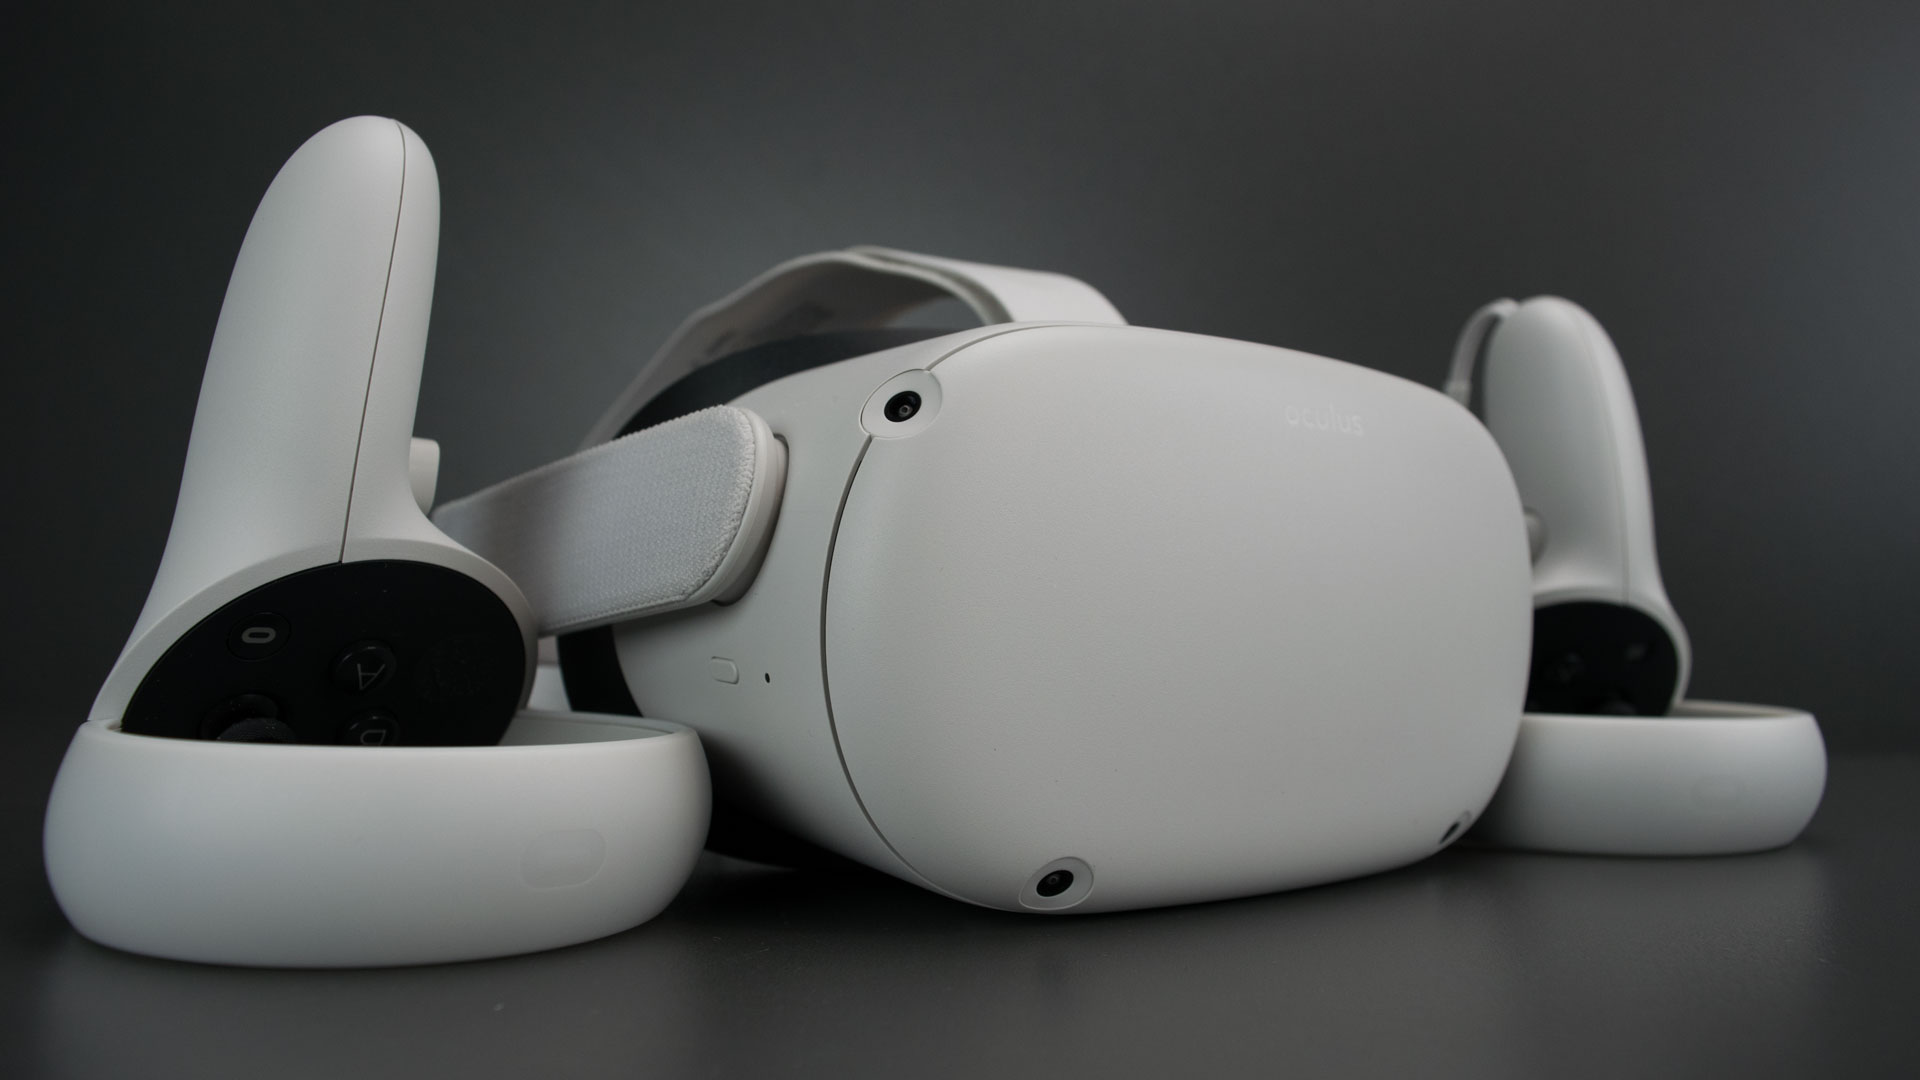 Oculus to Discontinue the Rift S, Quit PC-Only VR Headsets | Tom's